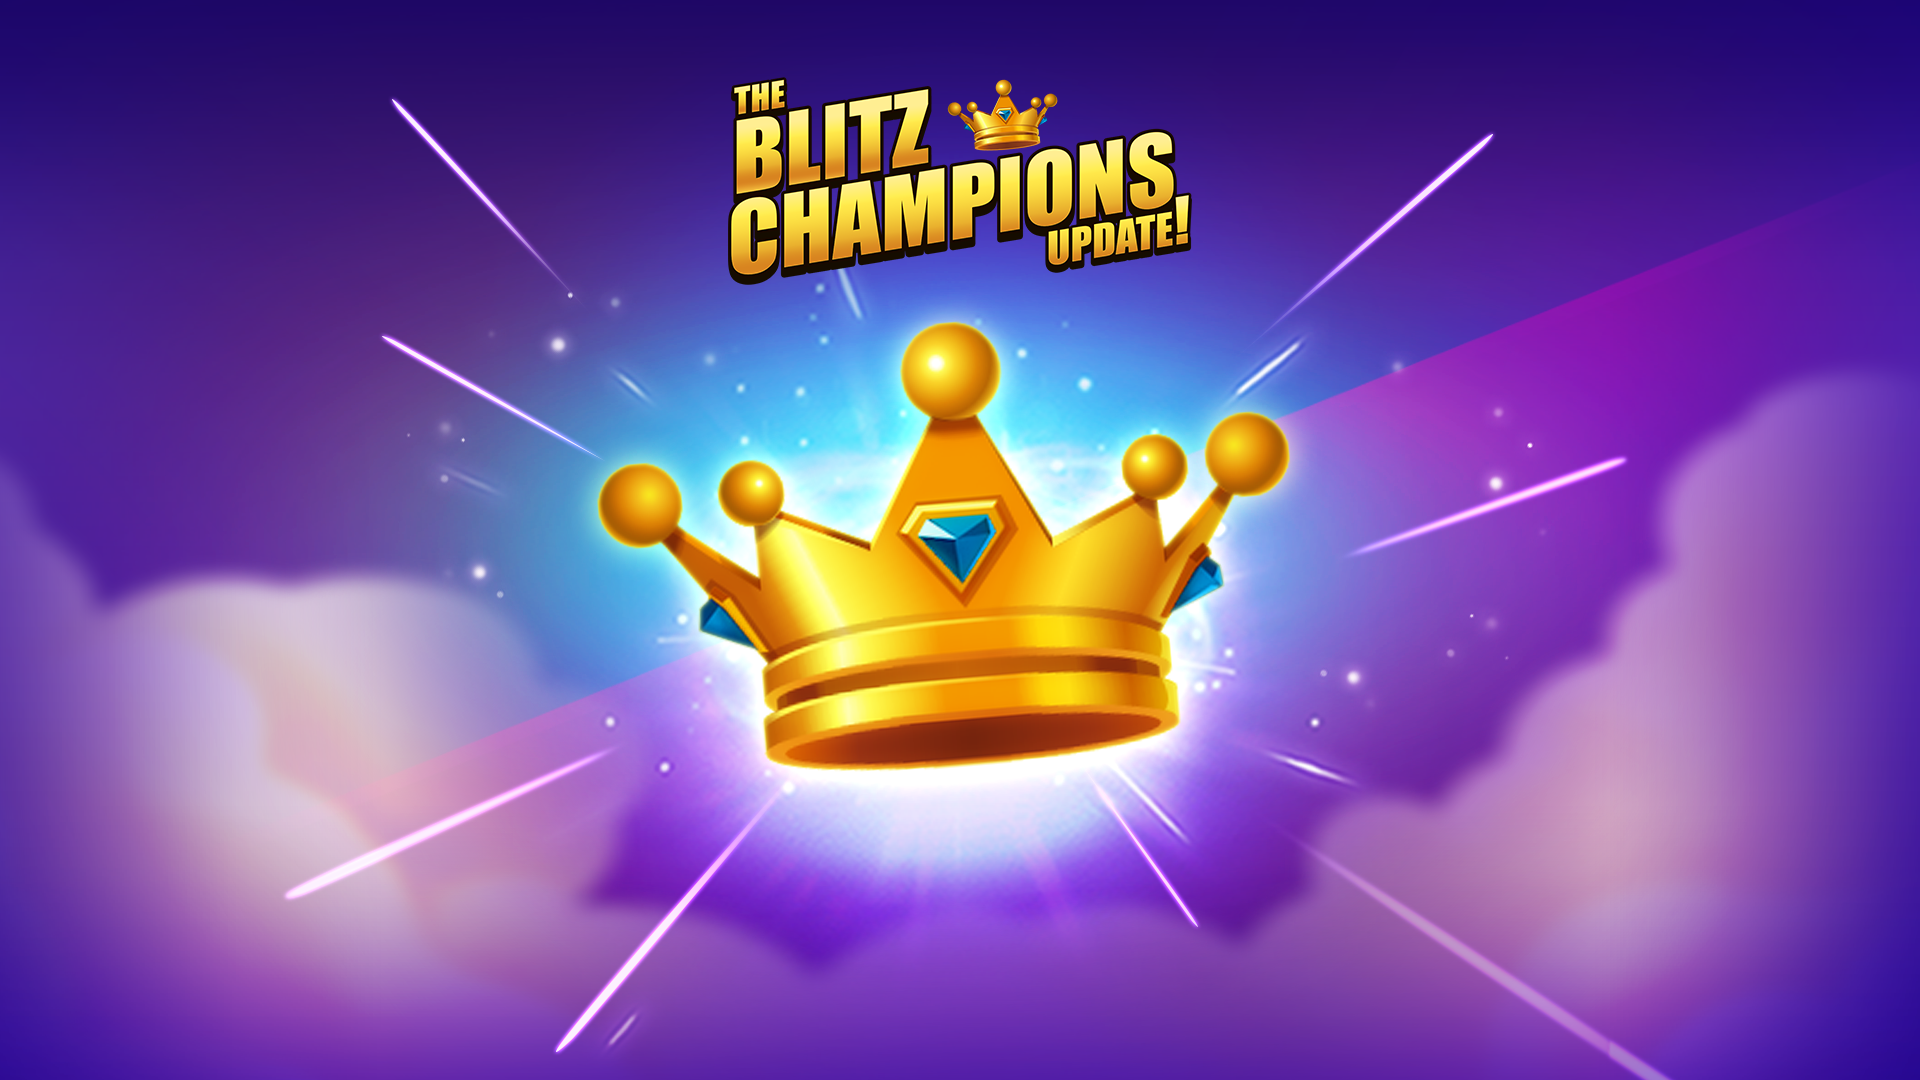 Introducing 'Blitz Champions' – a brand new game mode